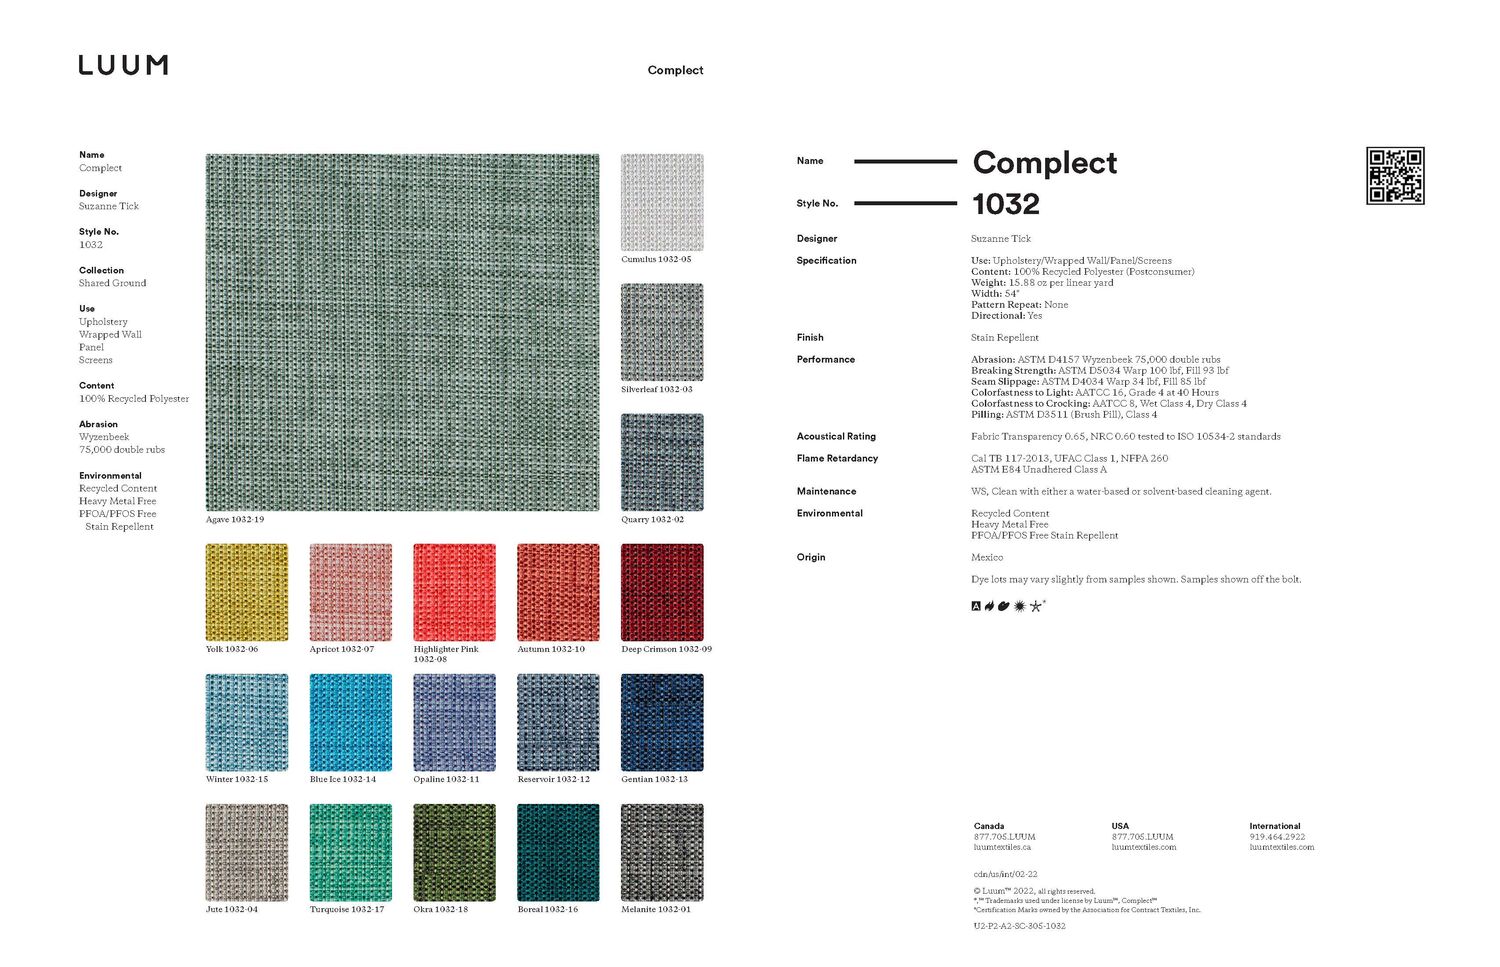 Complect - Gentian - 1032 - 13 Sample Card